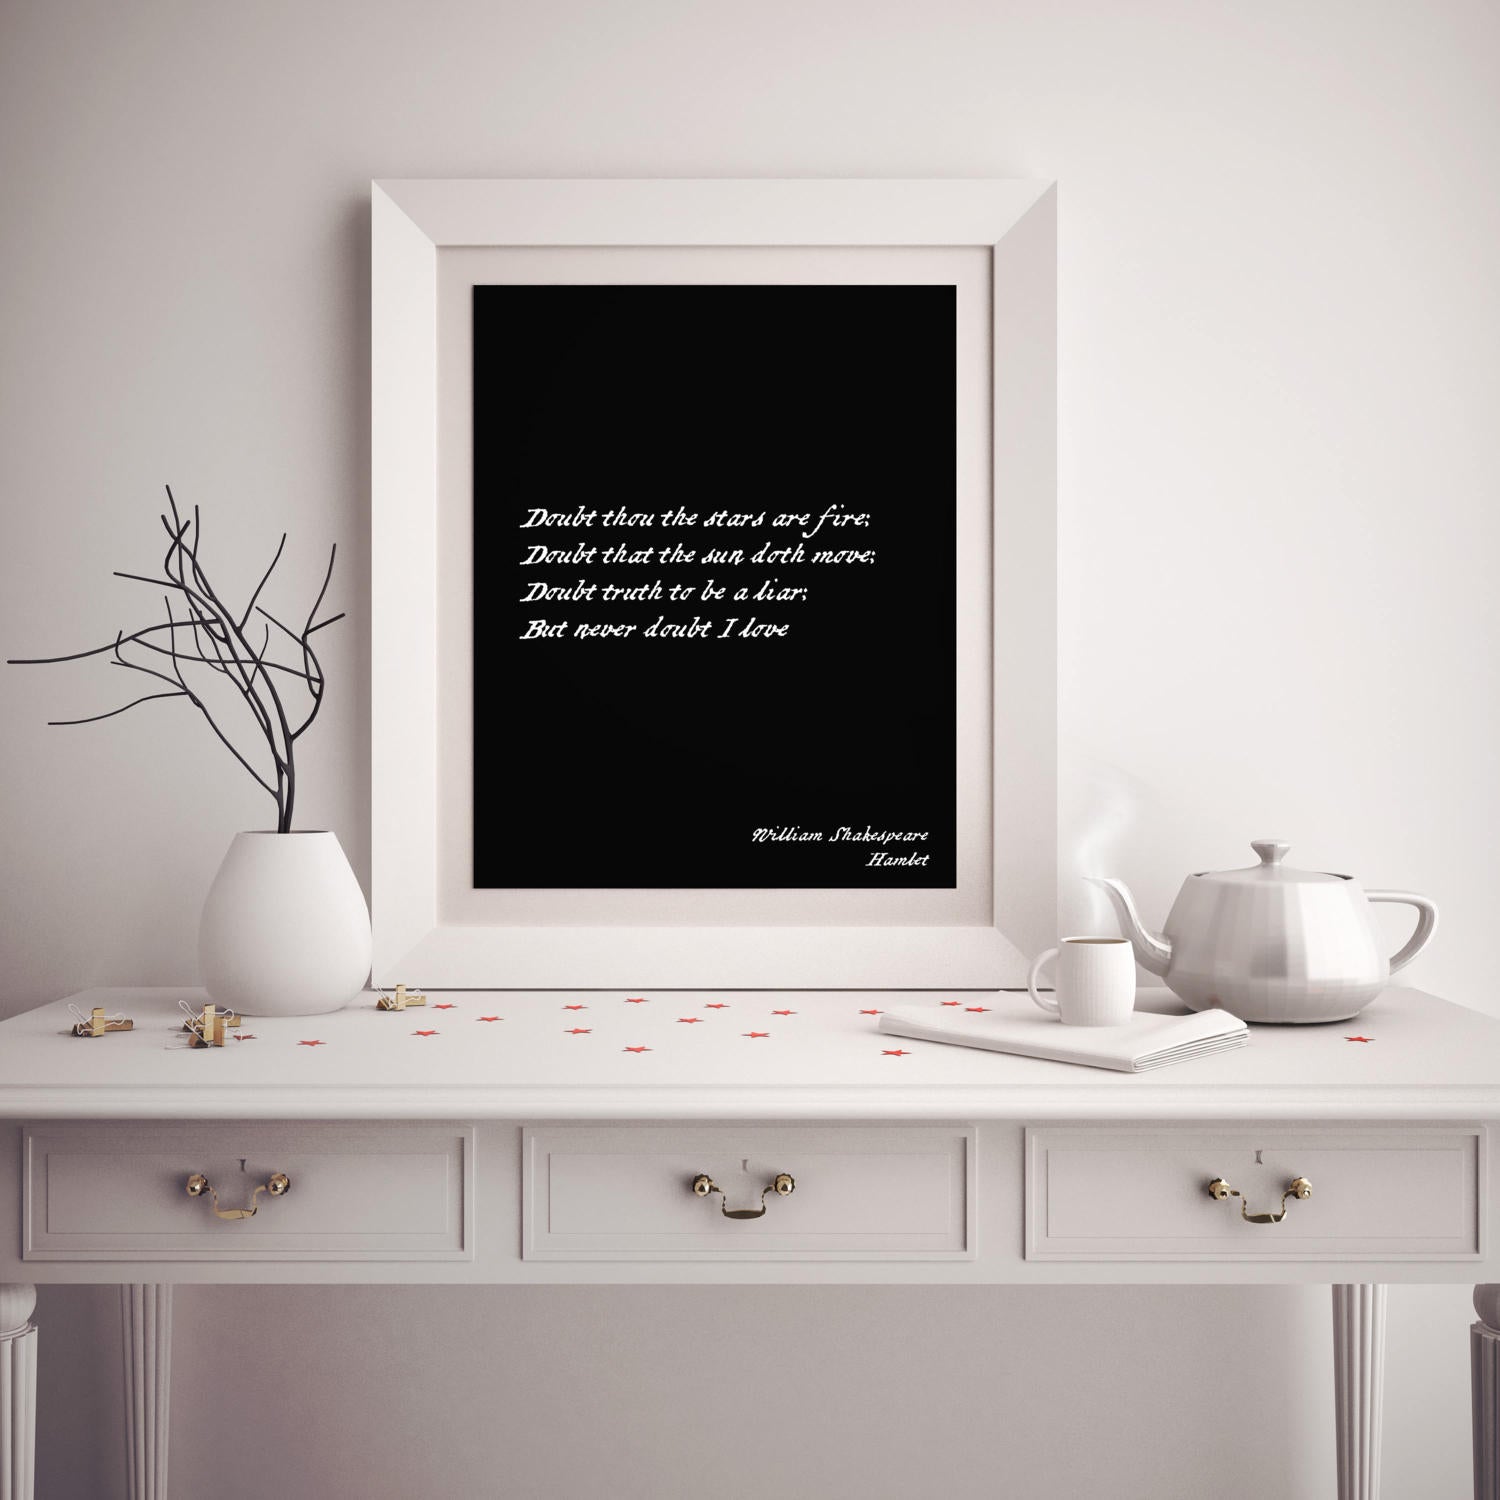 Never Doubt I Love Shakespeare Quote from Hamlet, Romantic Wall Art Prints in Black & White Unframed - BookQuoteDecor